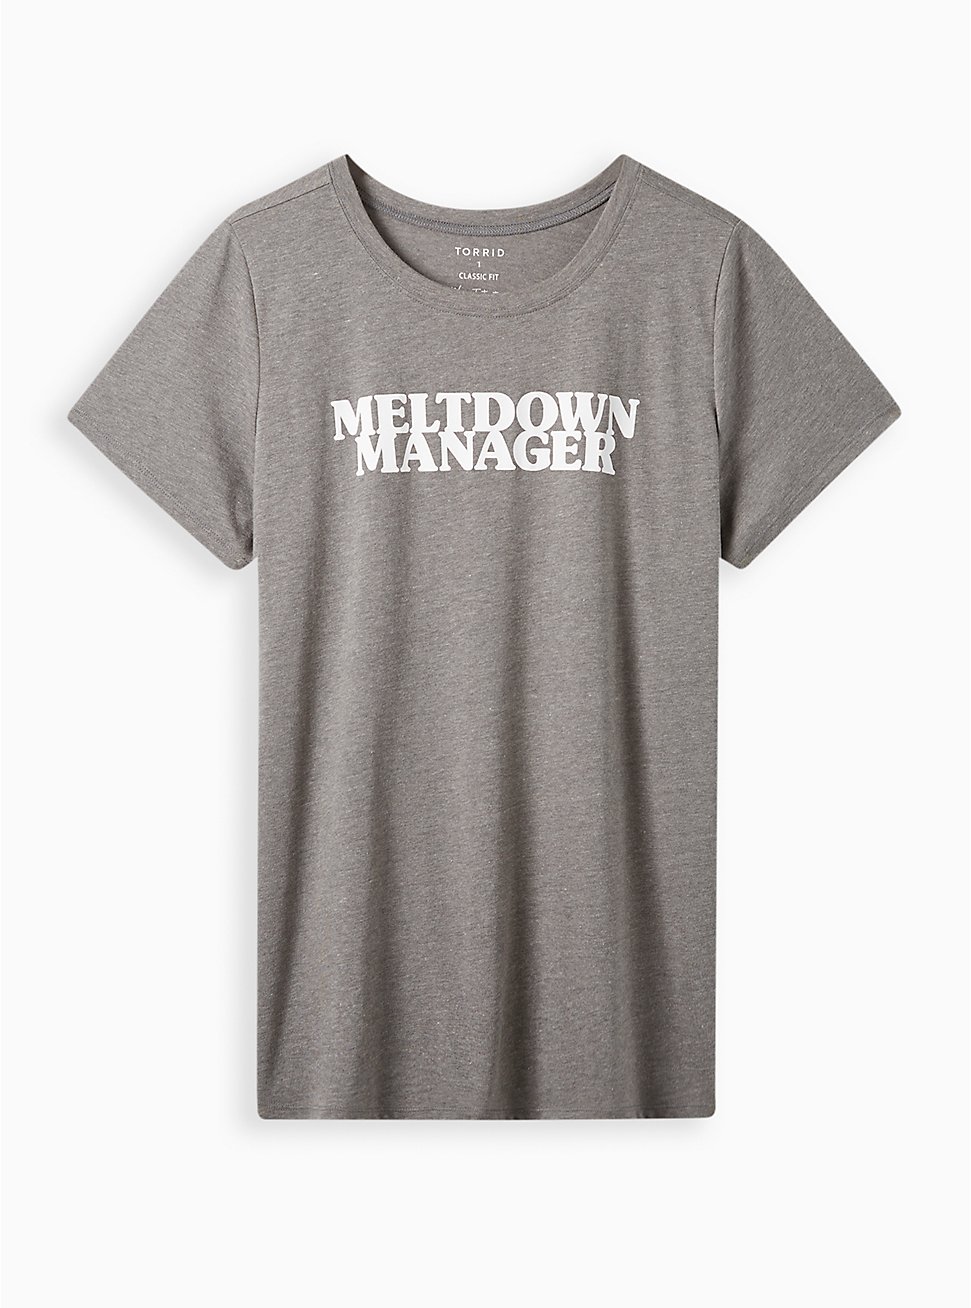 Plus Size Everyday Tee - Signature Jersey Heather Meltdown Manager Grey, HEATHER GREY, hi-res